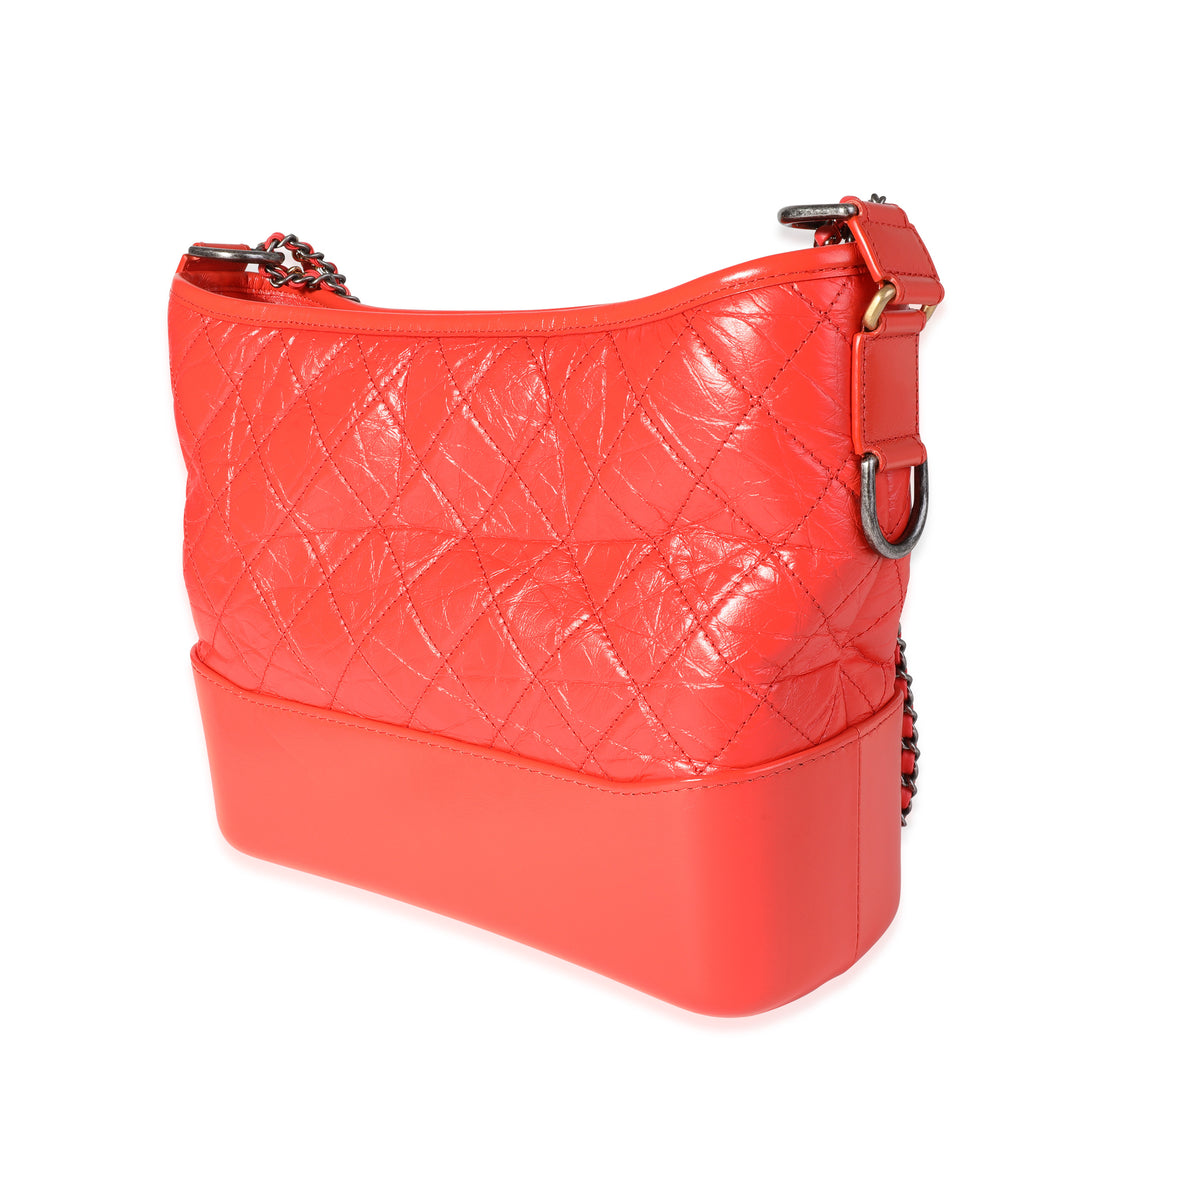 Chanel Orange Quilted Aged Calfskin Large Gabrielle Hobo, myGemma, CH